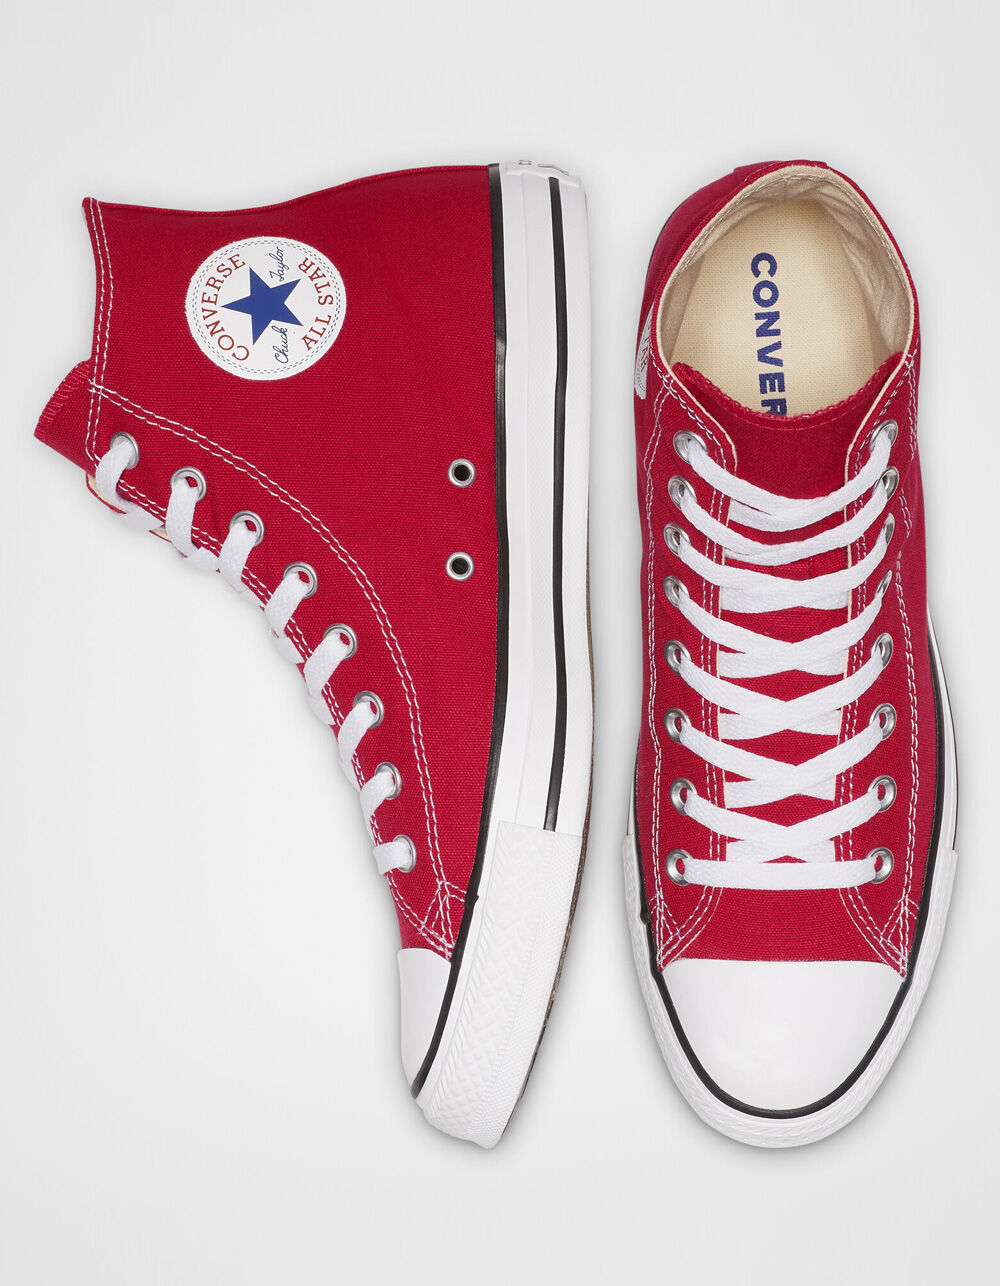 Converse Red Chuck Taylor All Star High Trainers